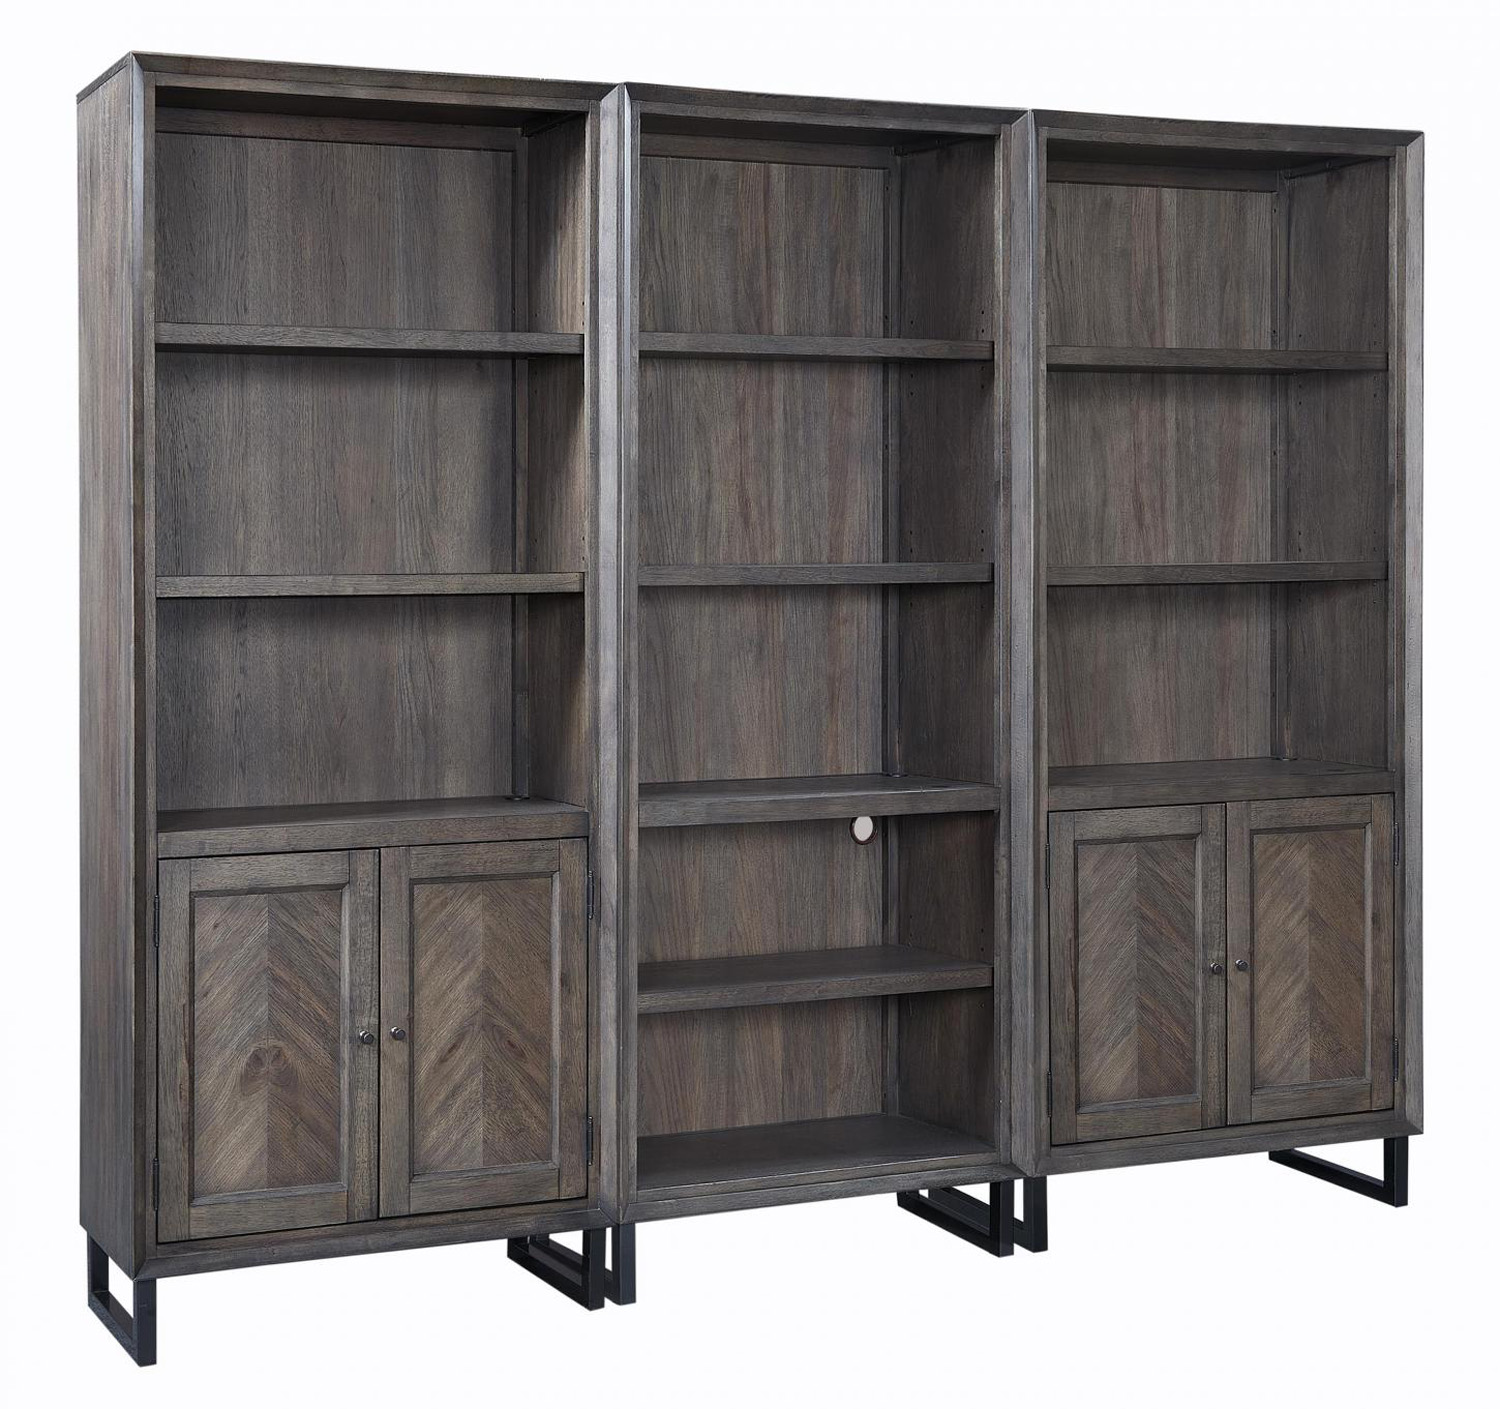 Harper Point Bookcases in the Fossil finish